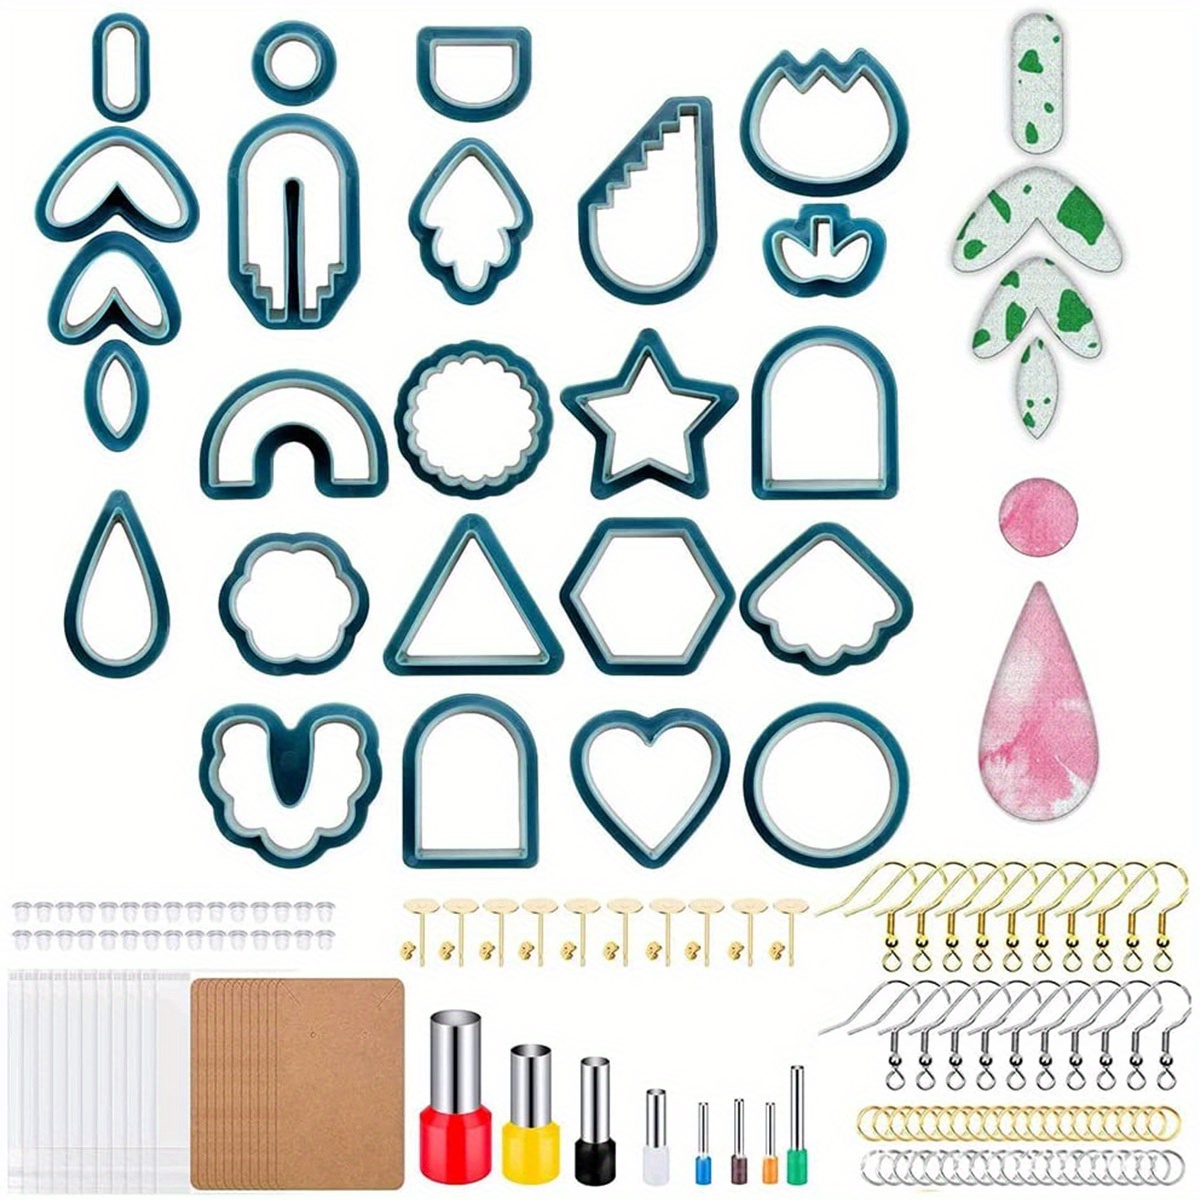 Urvrriu 129pcs DIY Clay Earring Cutters Set for Polymer Clay Jewelry Making Geometric Shapes Polymer Clay Cutters Set with Earring Hooks and Jump